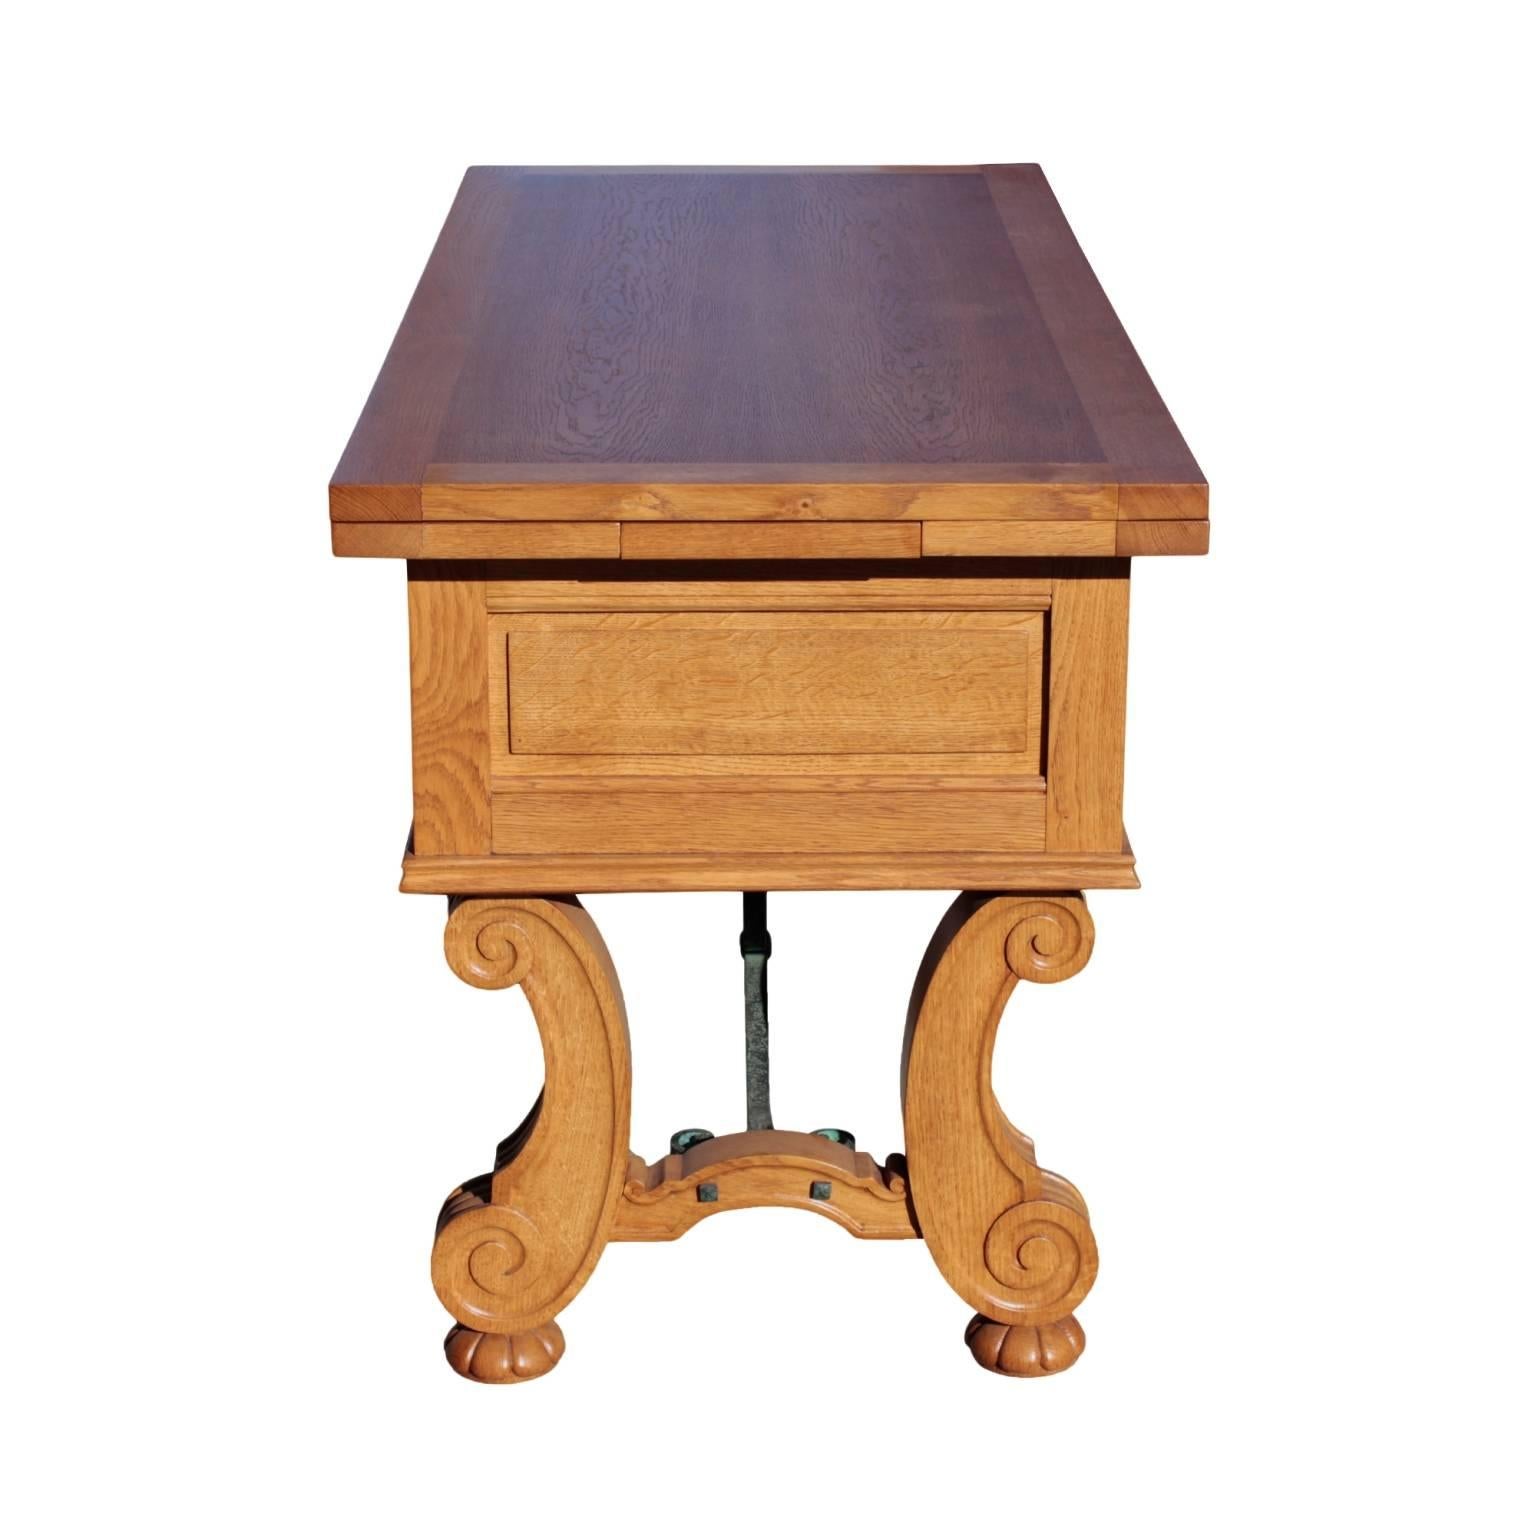 Distinctive banquet table attributed to Jean Charles Moreaux featuring rectangular top with two sliding pull-out extensions resting on a case with three drawers and three faux drawers fitted with verde antico fer forge fleur de lis hardware and